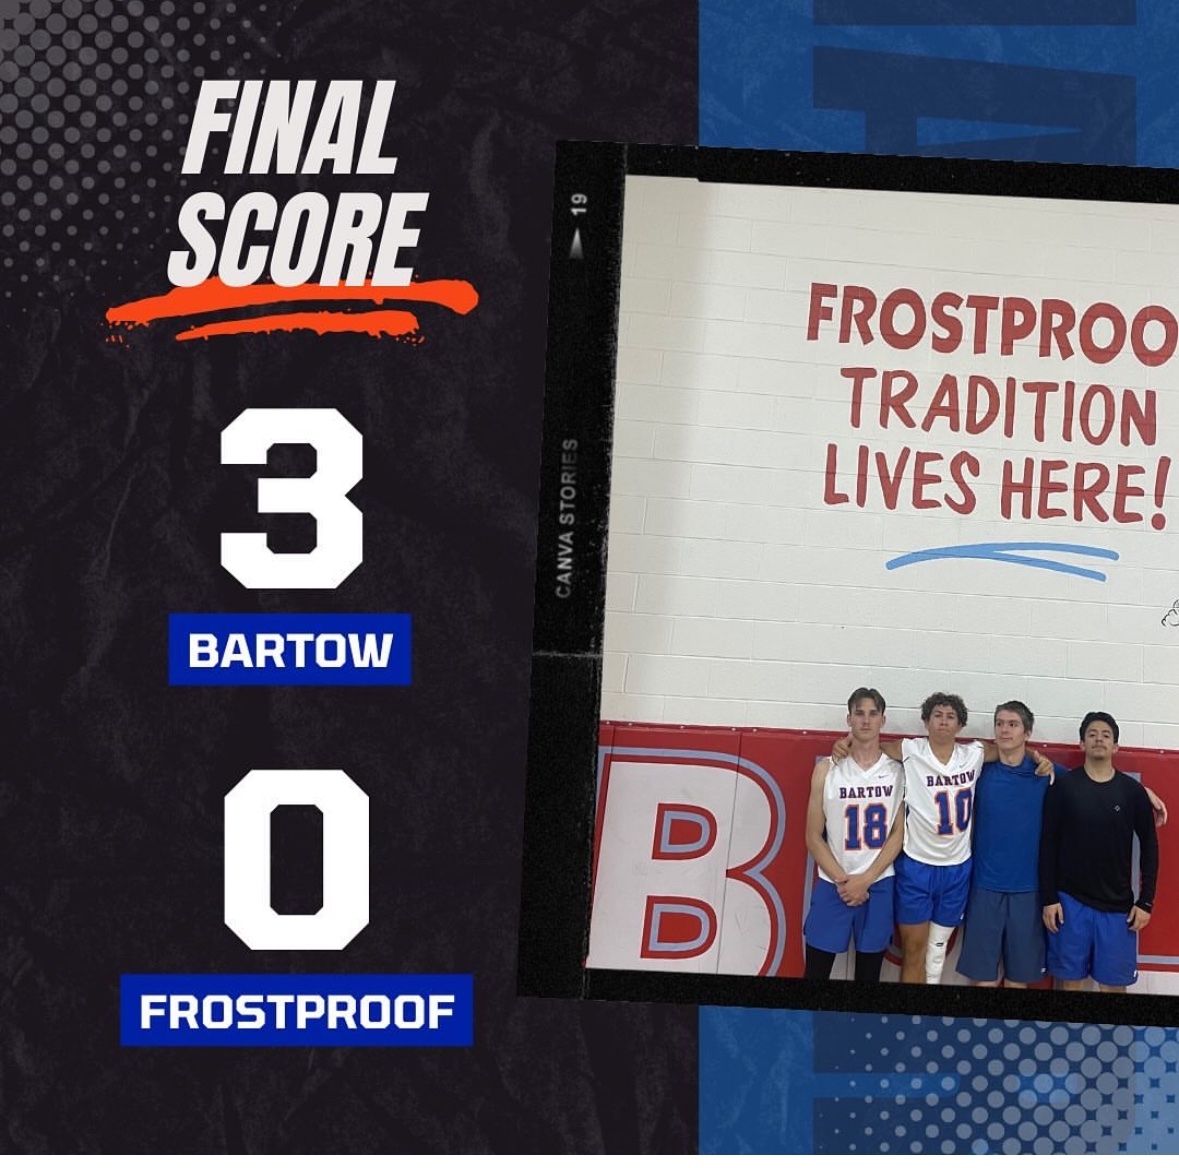 Big sweep at frostproof tn see everyone at Kathleen tmrw for the regular season finale as your 11 and 2 jackets take on the Kathleen Red Devils #swarm @BartowBoosters